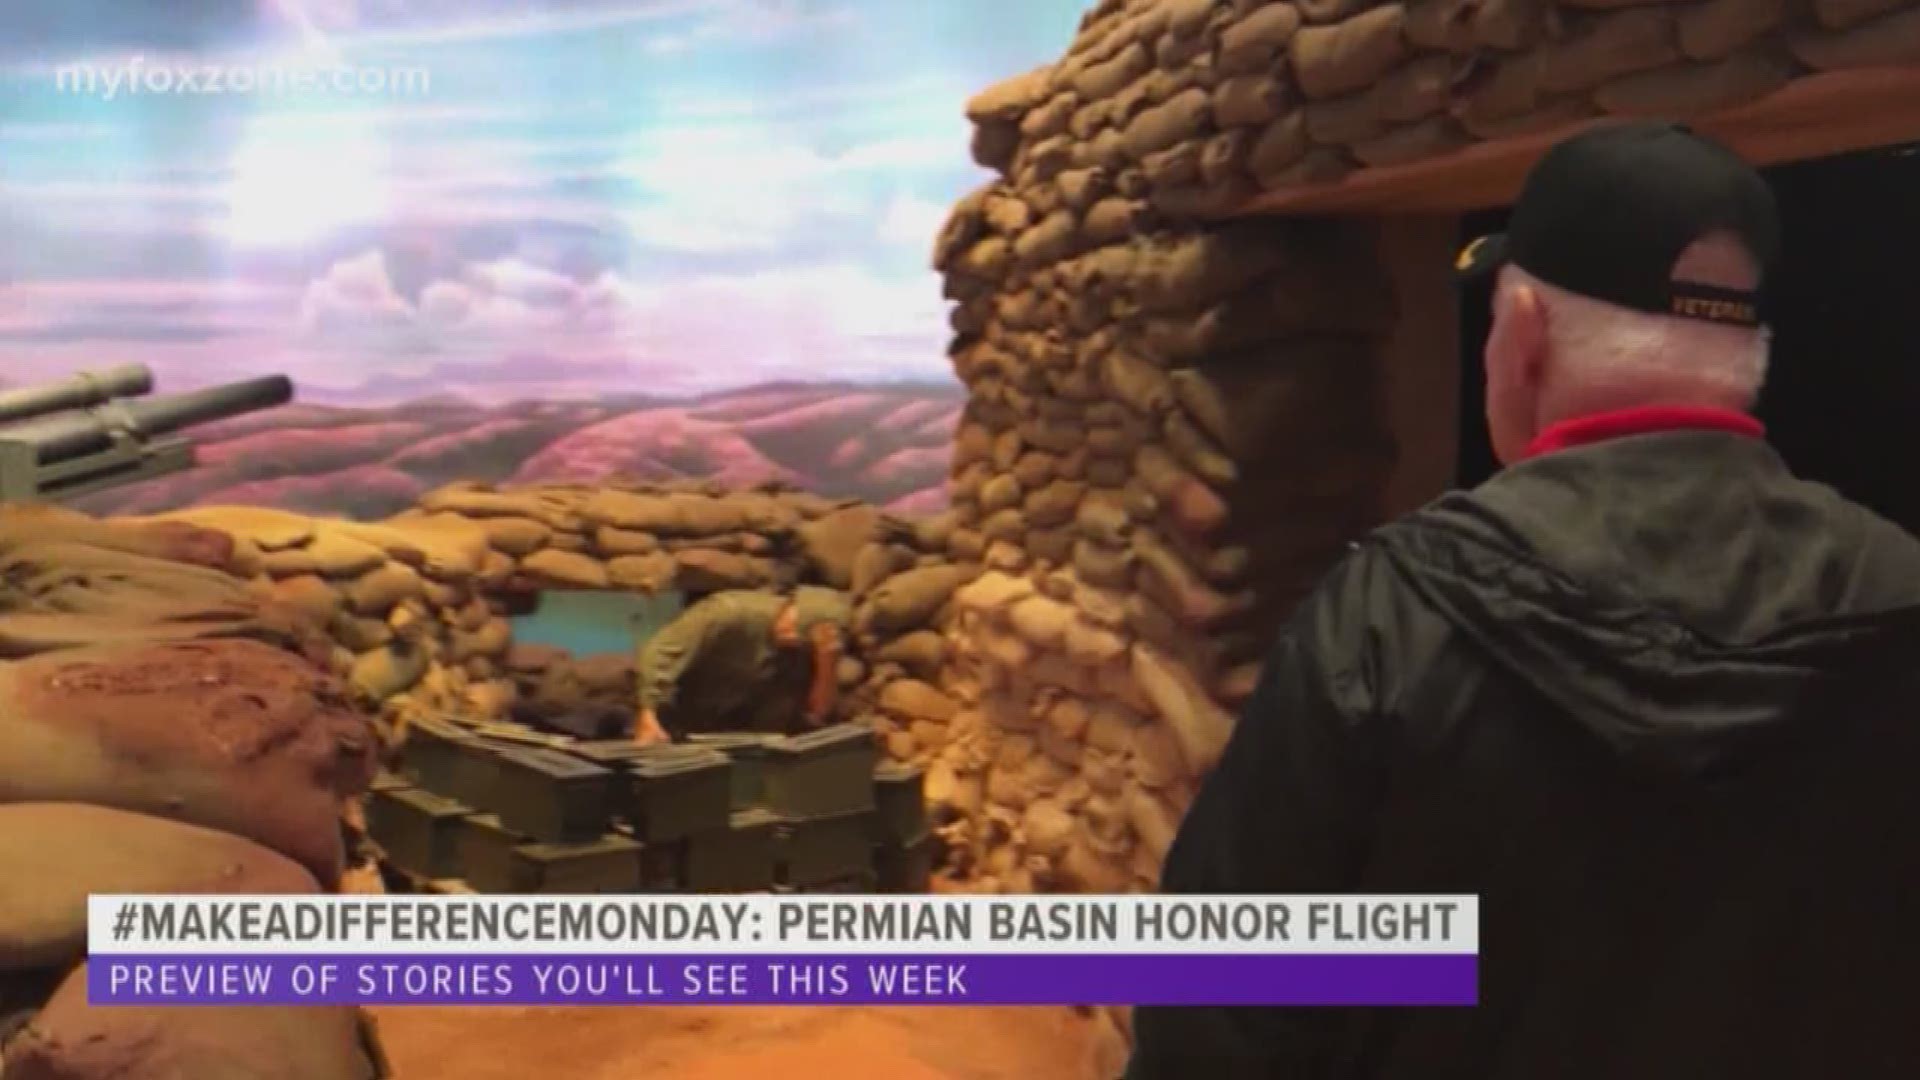 Preview of stories you'll see this week from the Permian Basin Honor Flight